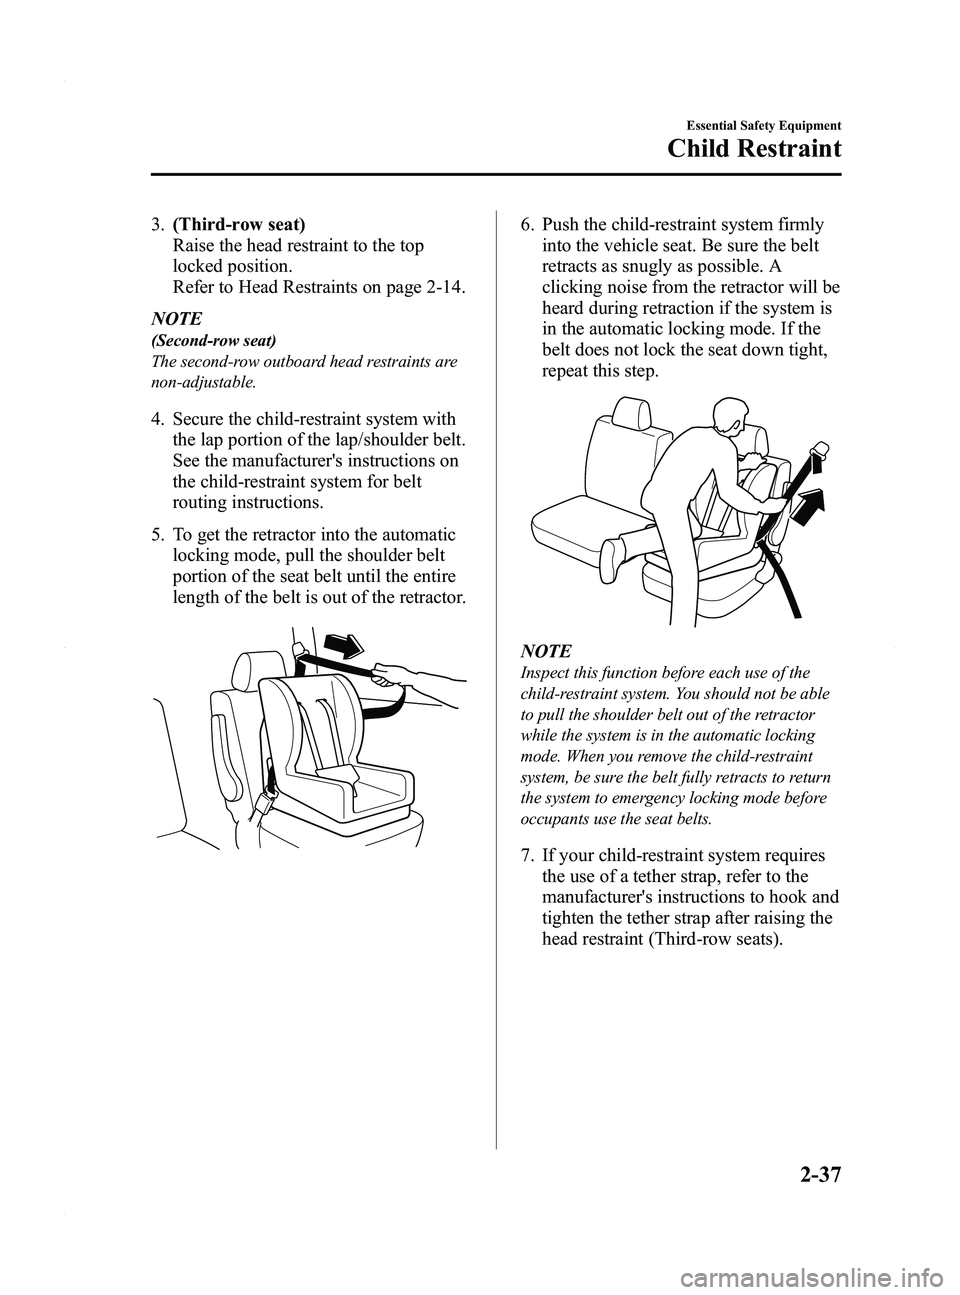 MAZDA MODEL 5 2015 Service Manual Black plate (49,1)
3.(Third-row seat)
Raise the head restraint to the top
locked position.
Refer to Head Restraints on page 2-14.
NOTE
(Second-row seat)
The second-row outboard head restraints are
non